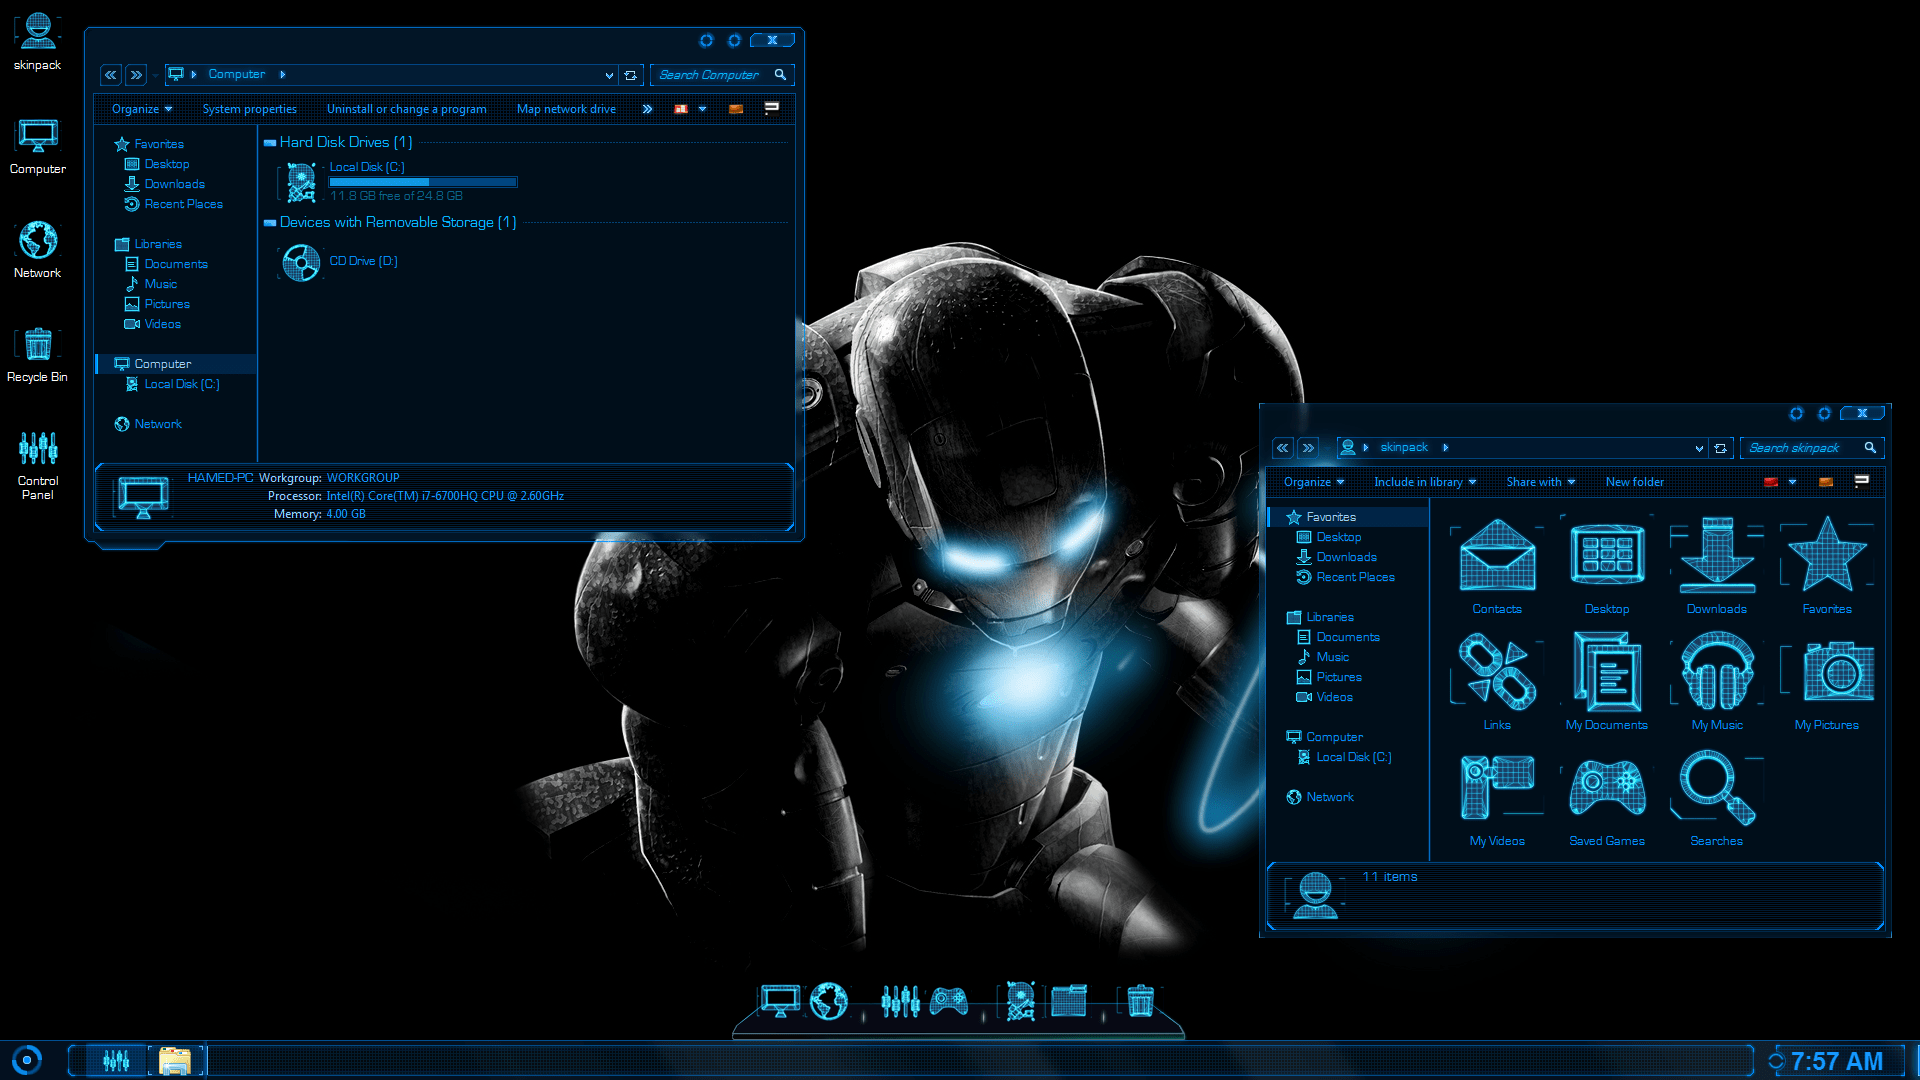 Jarvis SkinPack for Windows 7\8.1\10 19H1. 19H2. 20H1 Pack Theme for Windows 10